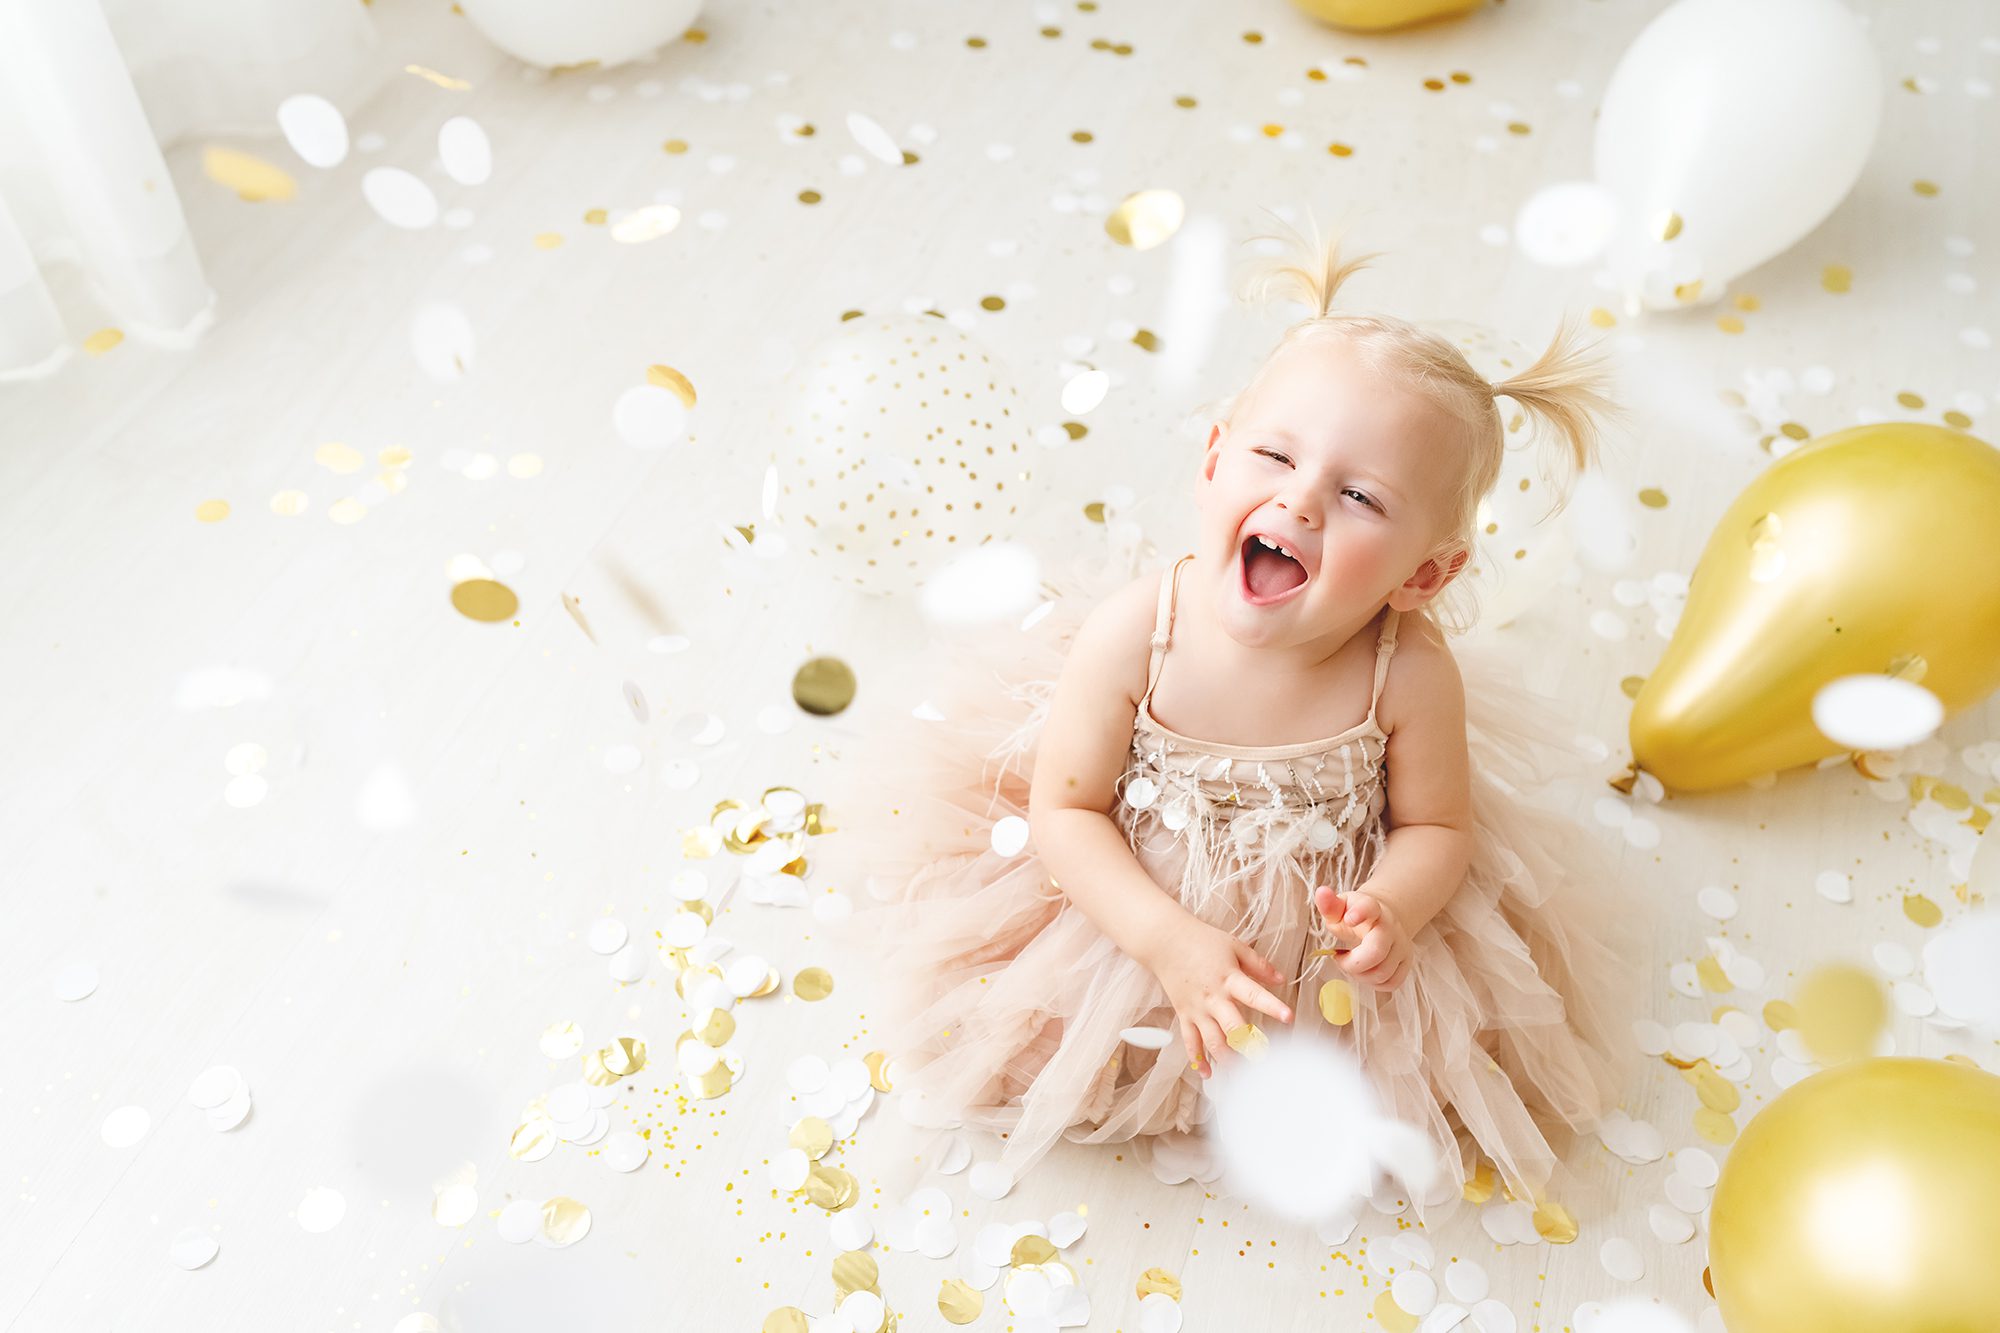 new years eve photoshoot ideas kids baby girl in blush pink dress with gold confetti and gold balloons